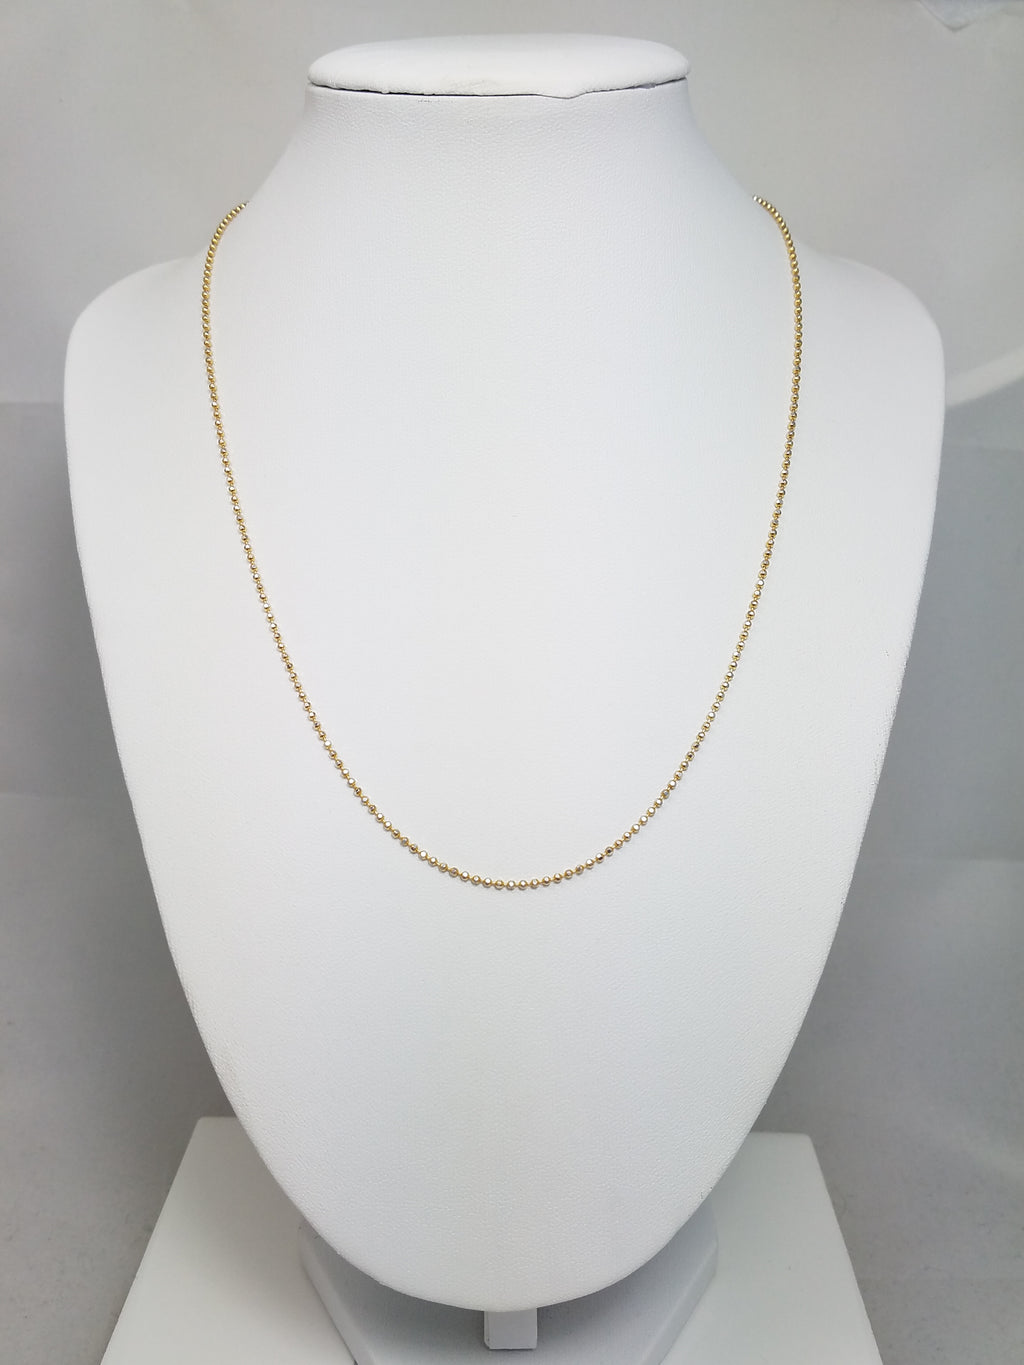 Petite 18" 14k Two Tone Gold Microbead Chain Necklace Italy